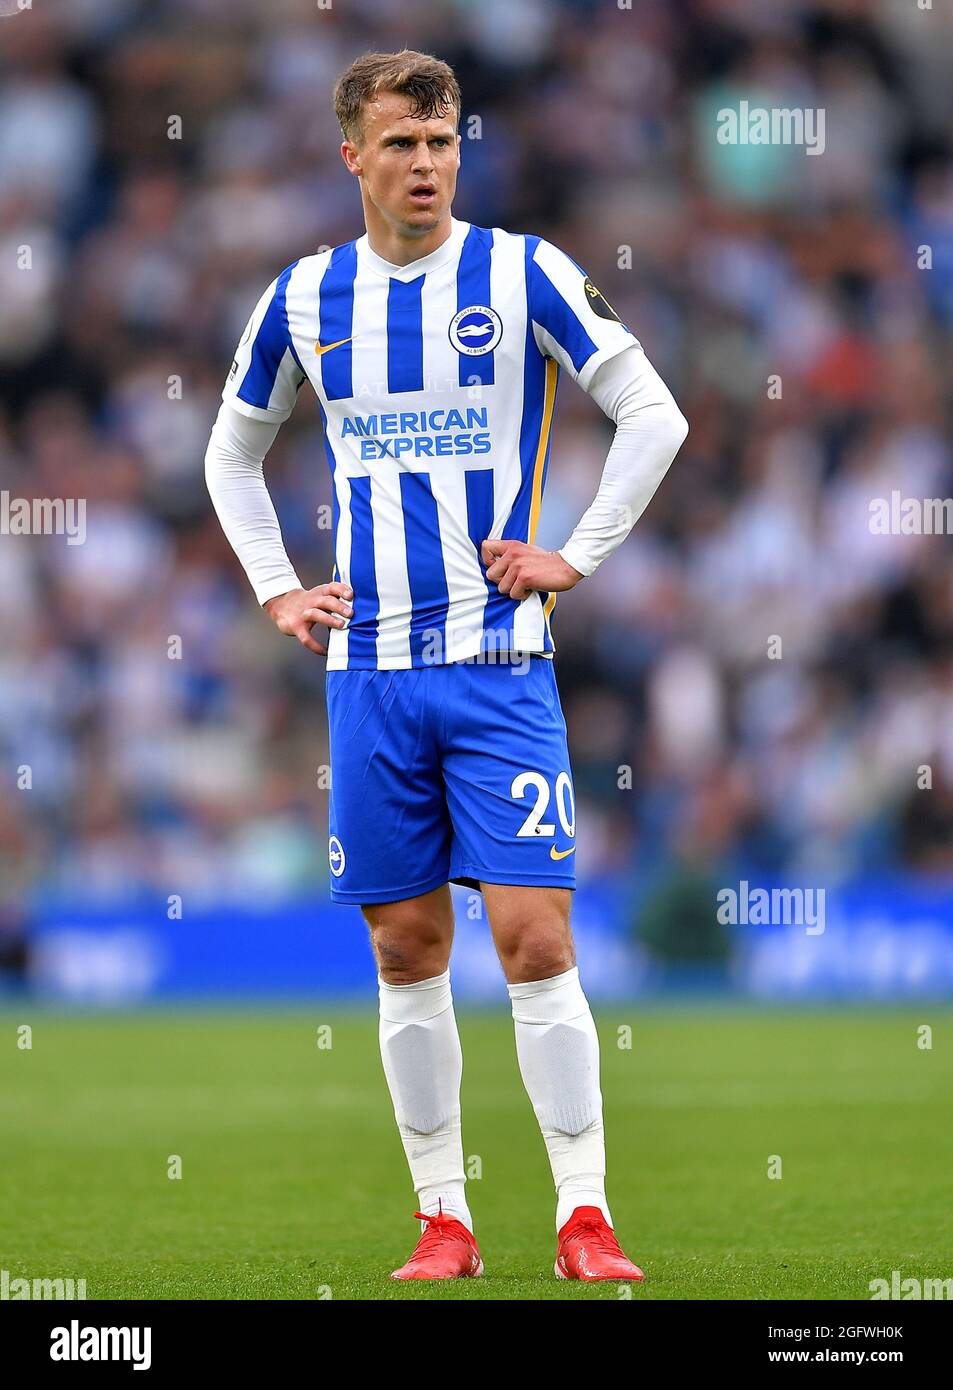 Solly March of Brighton & Hove Albion - Brighton & Hove Albion v Watford, Premier League, Amex Stadium, Brighton, Royaume-Uni - 21 août 2021 usage éditorial exclusif - restrictions DataCo applicables Banque D'Images